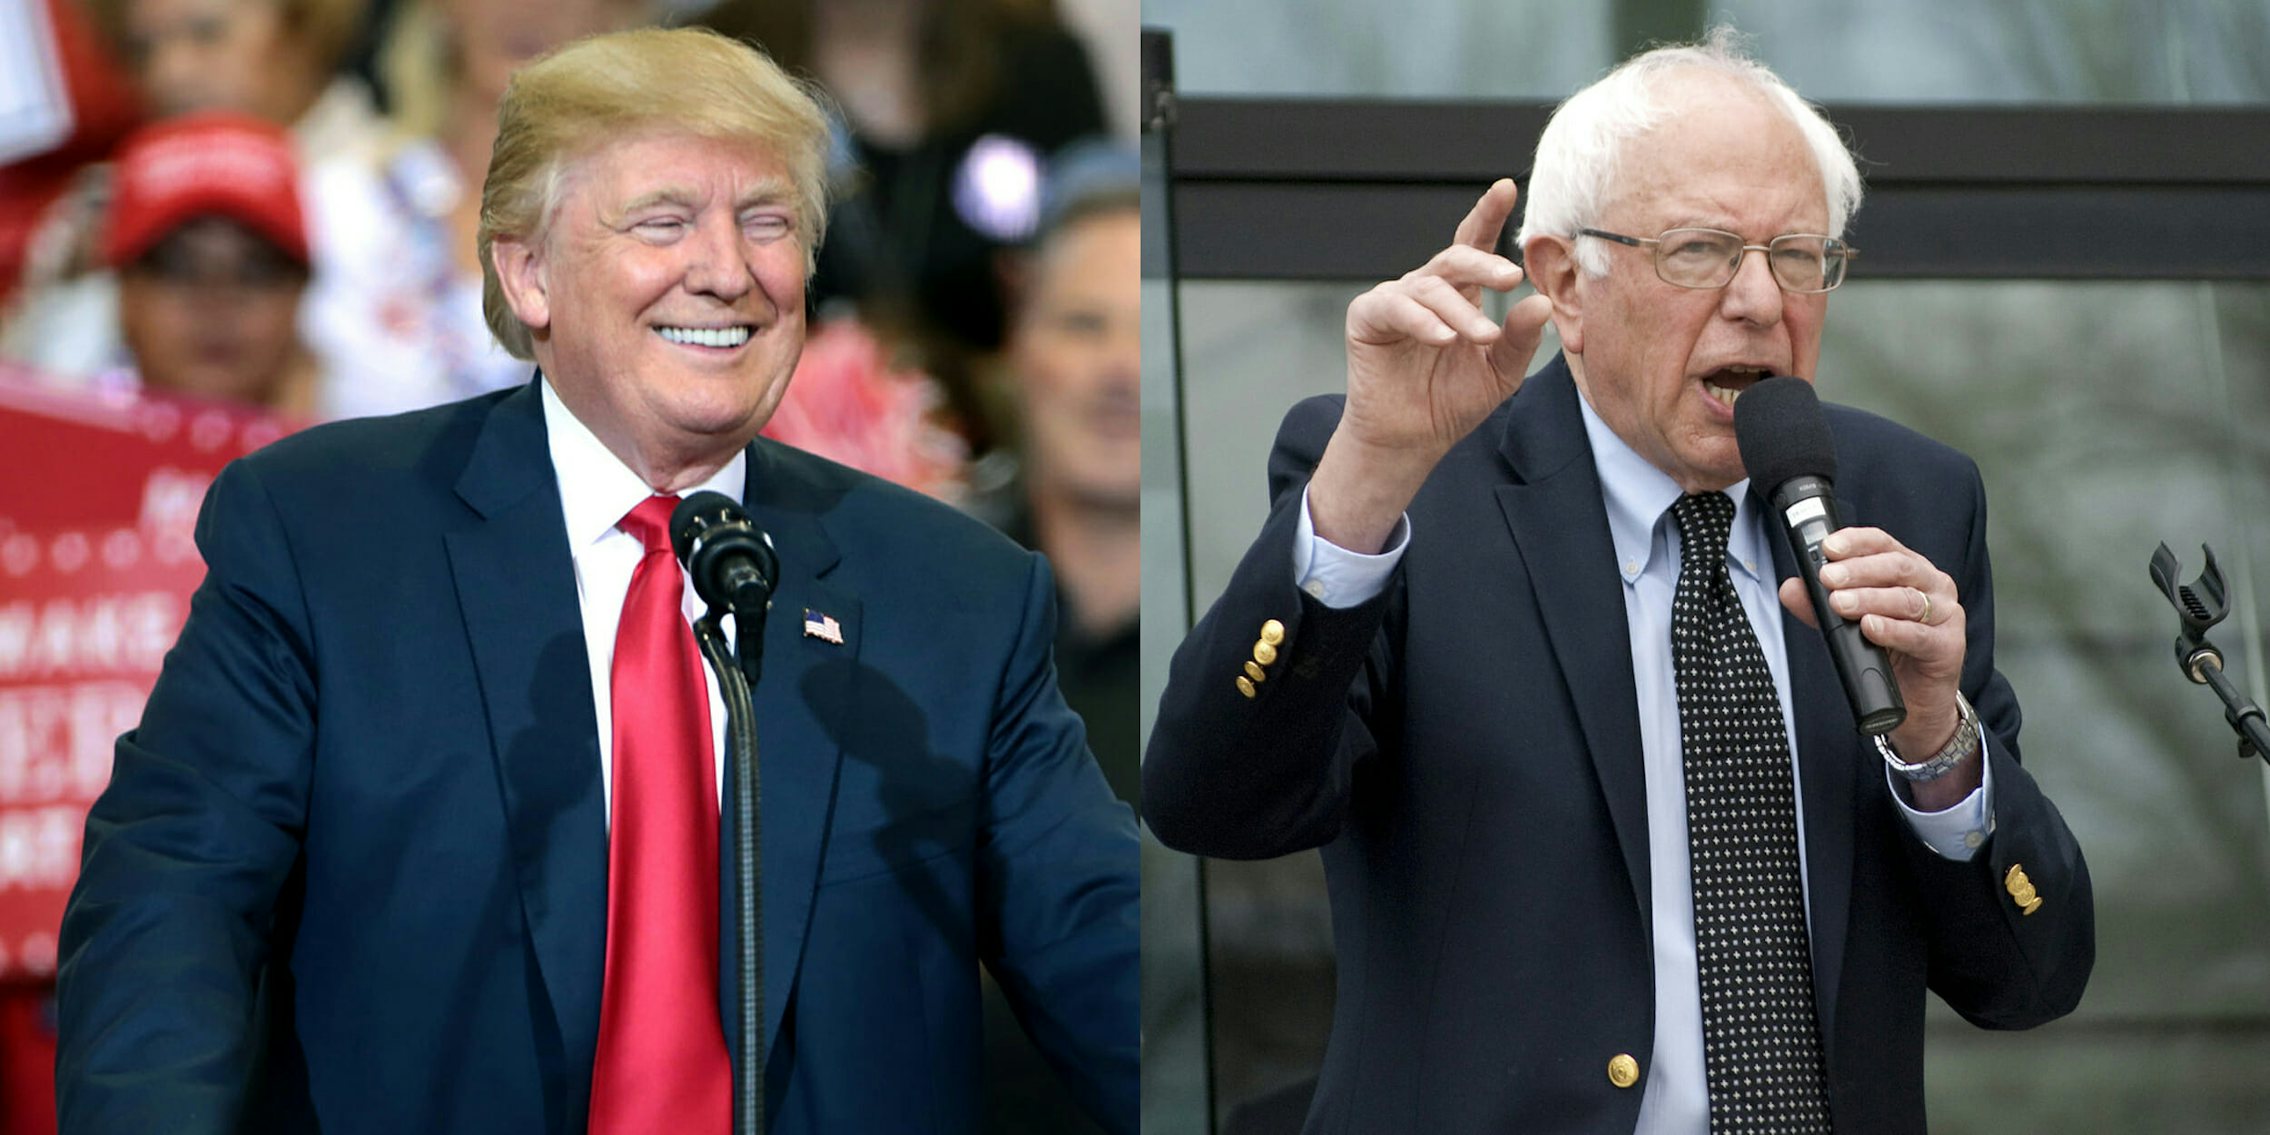 Donald Trump and Bernie Sanders sparred over single payer healthcare on Twitter on Thursday afternoon.